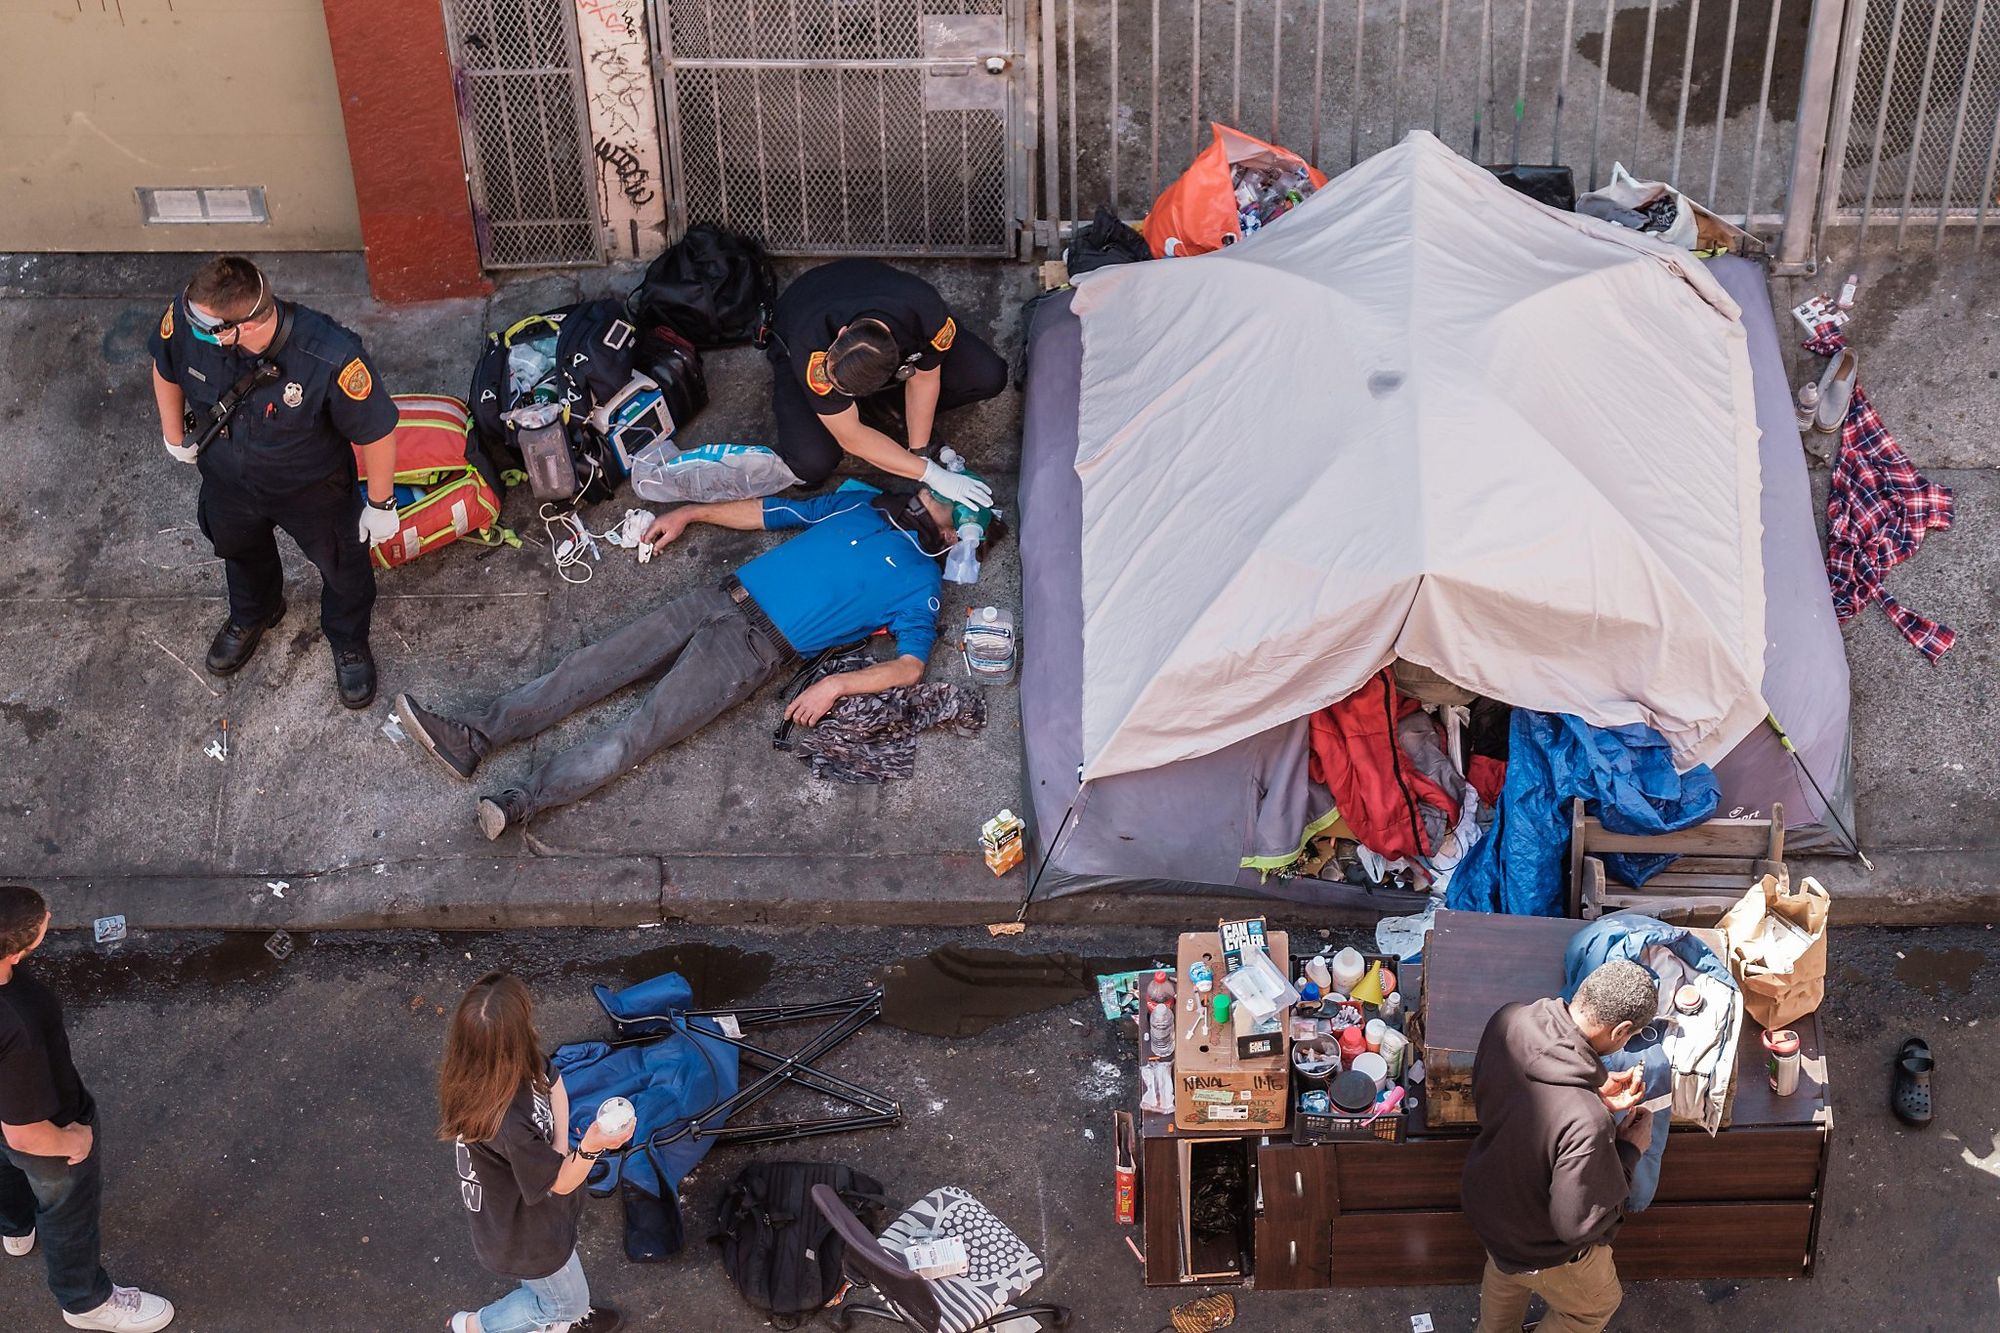 Why San Francisco needs an Austinstyle Public Camping Ban